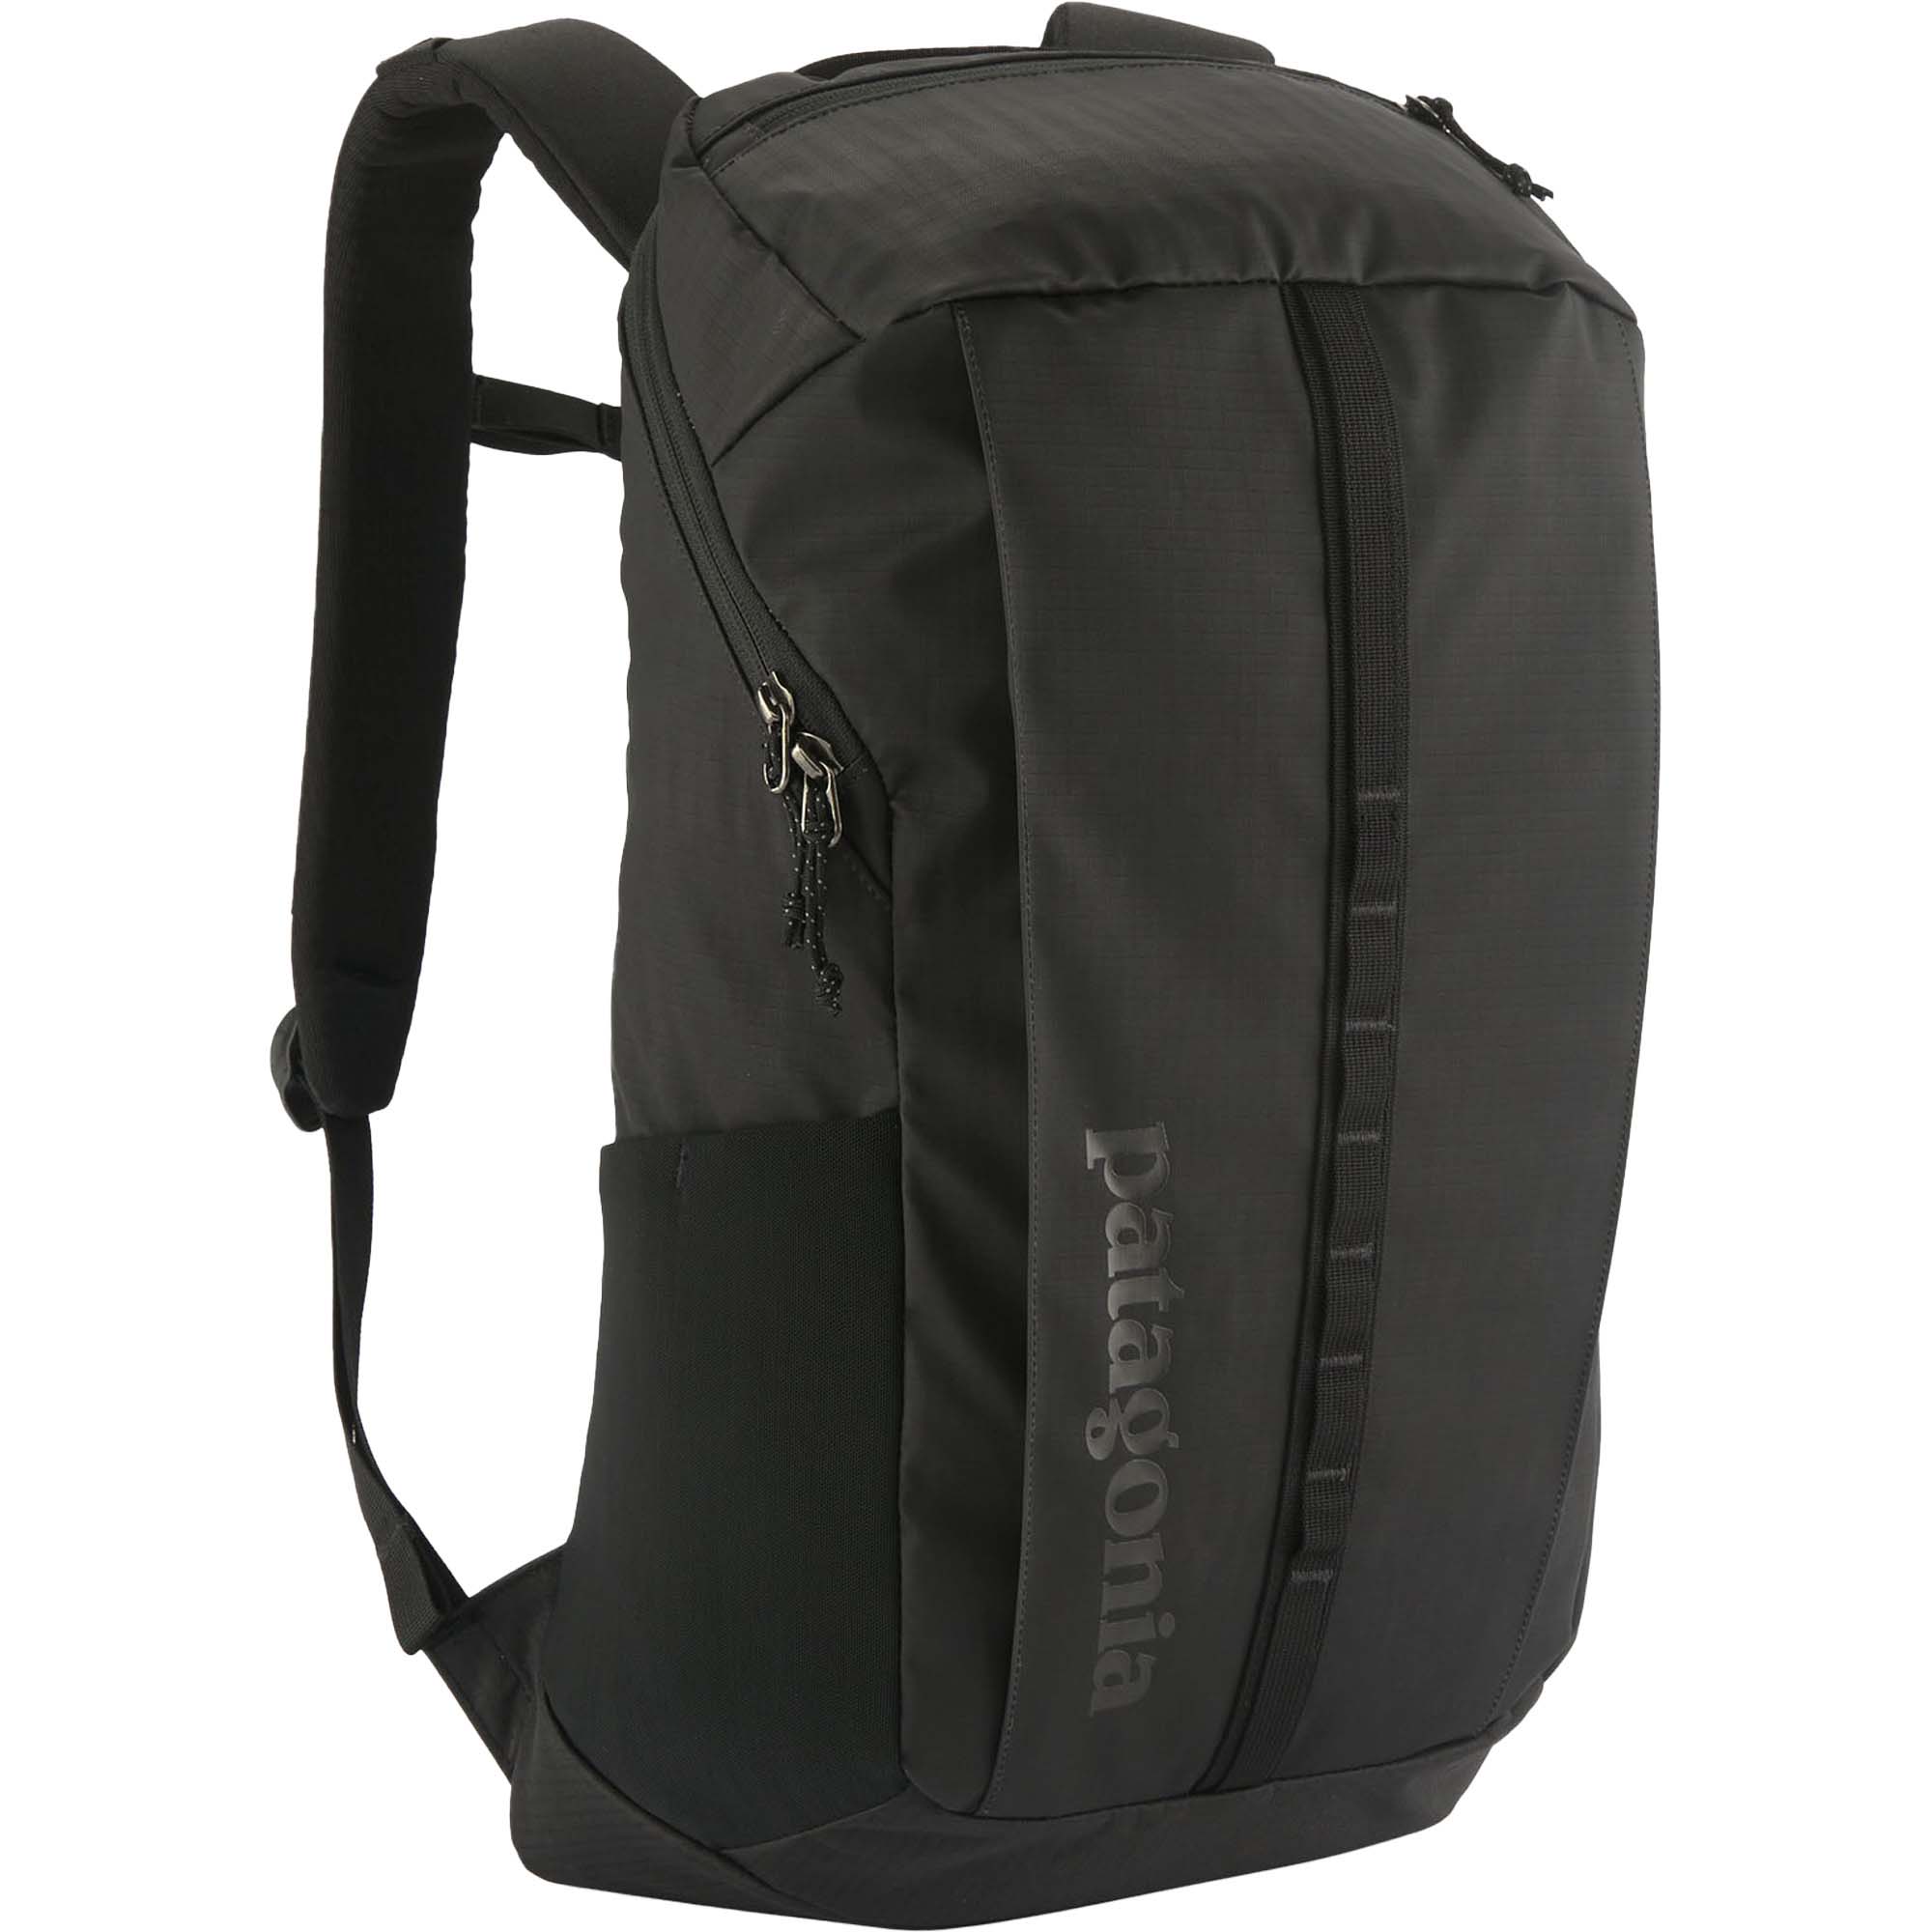 Patagonia Black Hole 25 Day Pack/Backpack